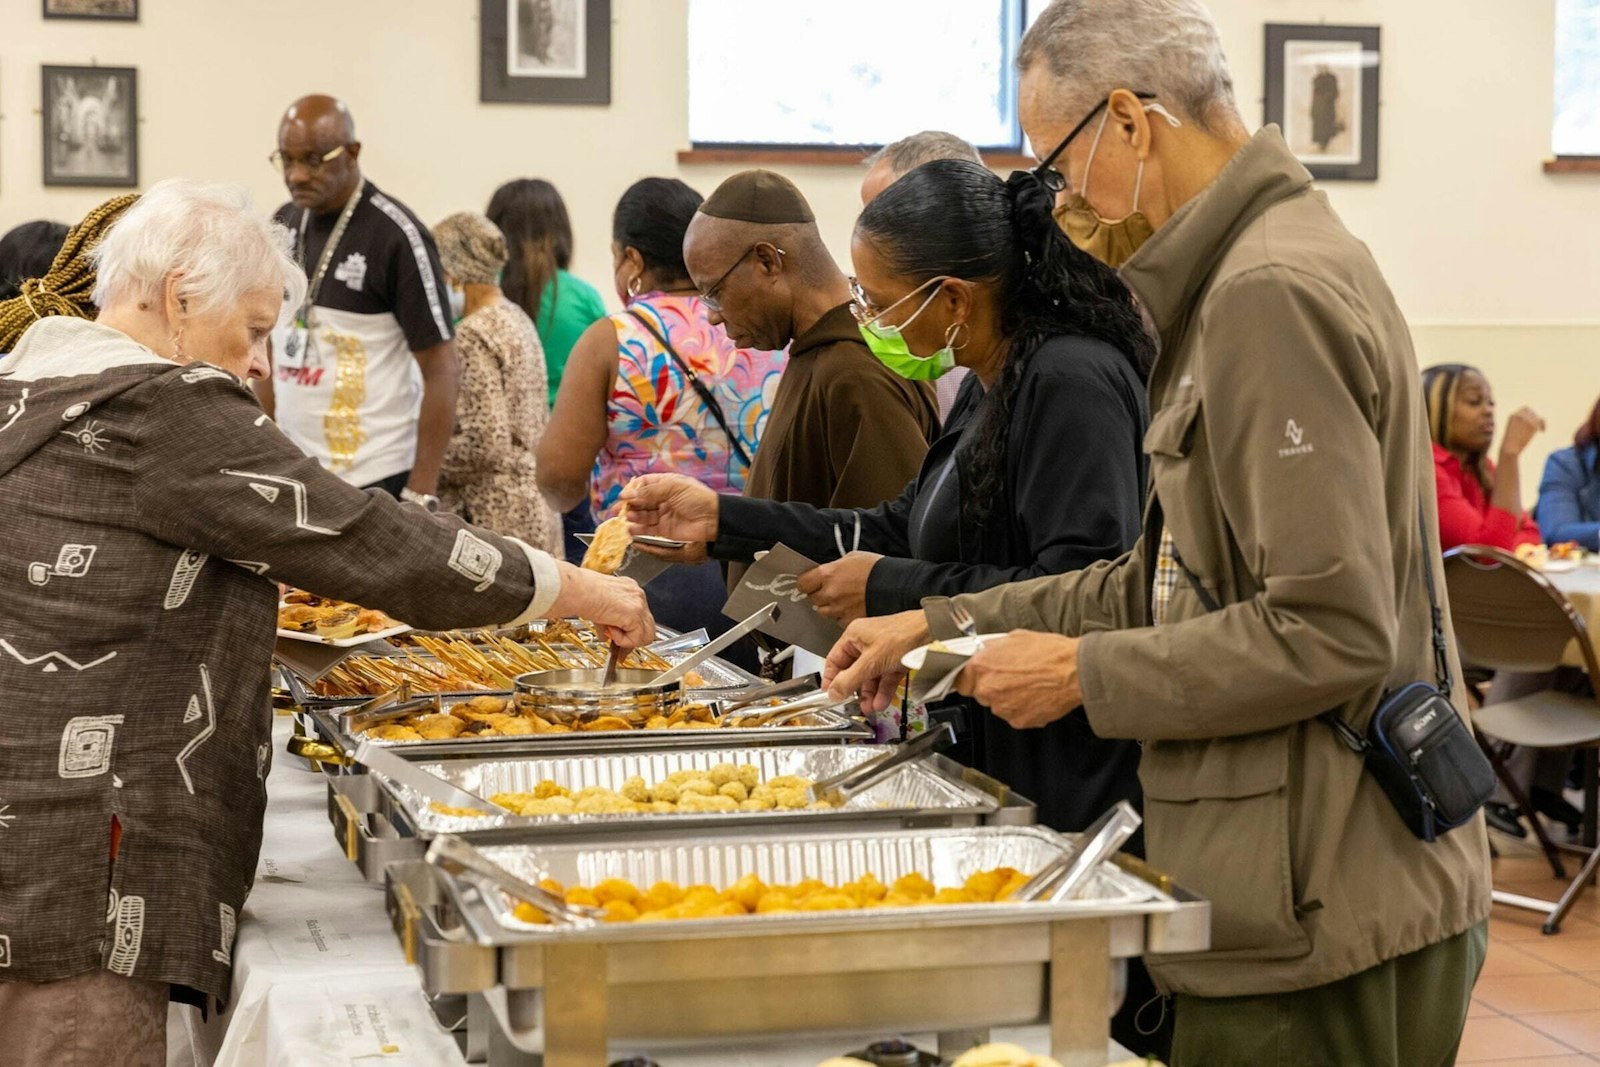 Guests are served at the Capuchin Soup Kitchen on Meldrum Street on Sept. 16, 2022. The soup kitchen, open Monday through Friday, 8:30 to 9:30 a.m. for breakfast, 11 a.m. to 1 p.m. for lunch and 4-5 p.m. for dinner, and Saturday breakfast, aims to be a place for guests to lounge and relax in between meals or stay warm and dry during inclement weather. (Steven Stechschulte | Capuchin Franciscan Province of St. Joseph)